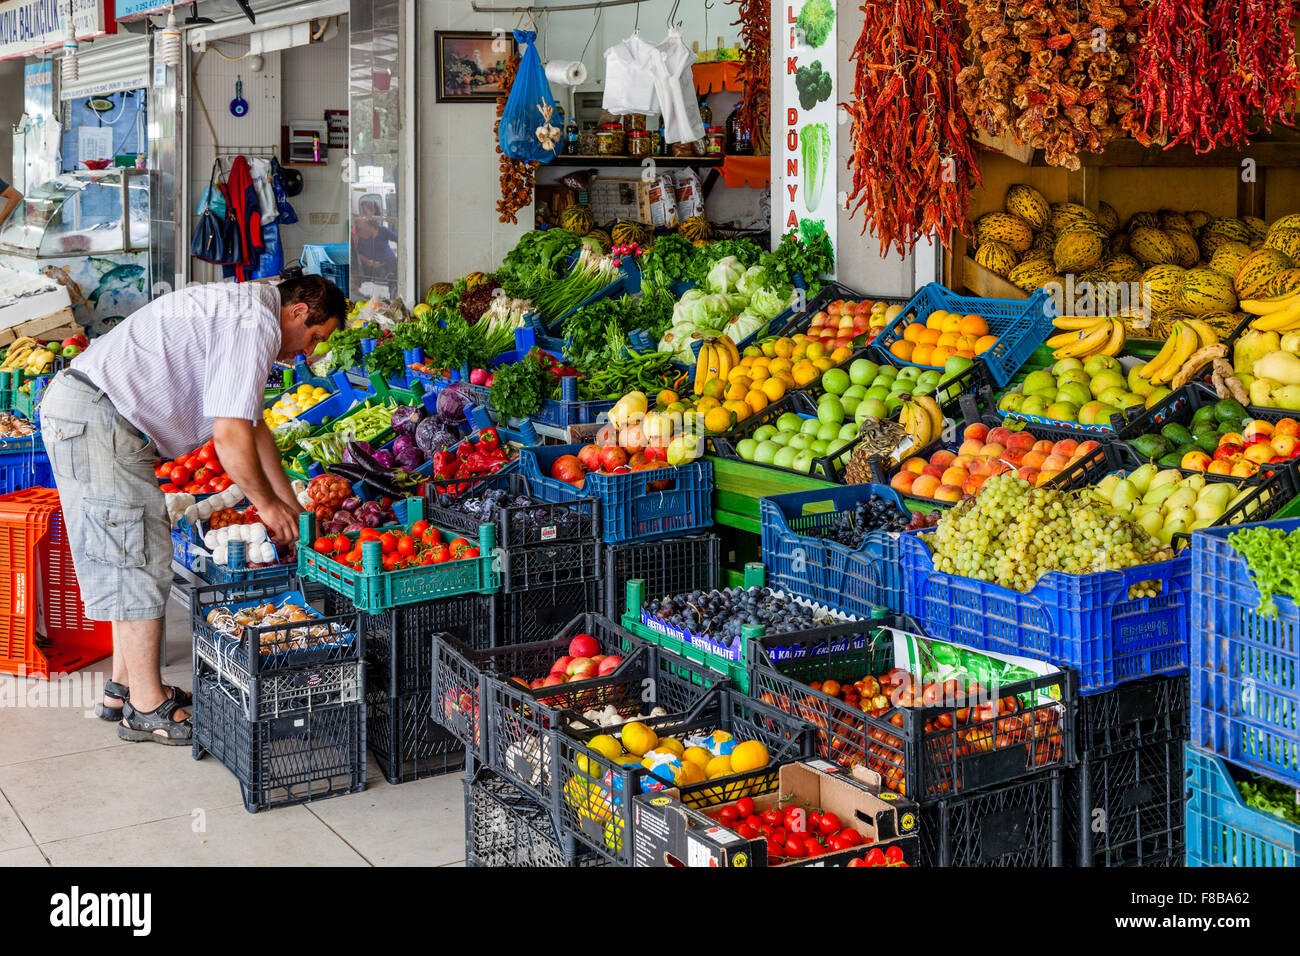 Fruit and Vegetables For Sale In The Market At Marmaris, Mugla Province, Turkey Stock Photo